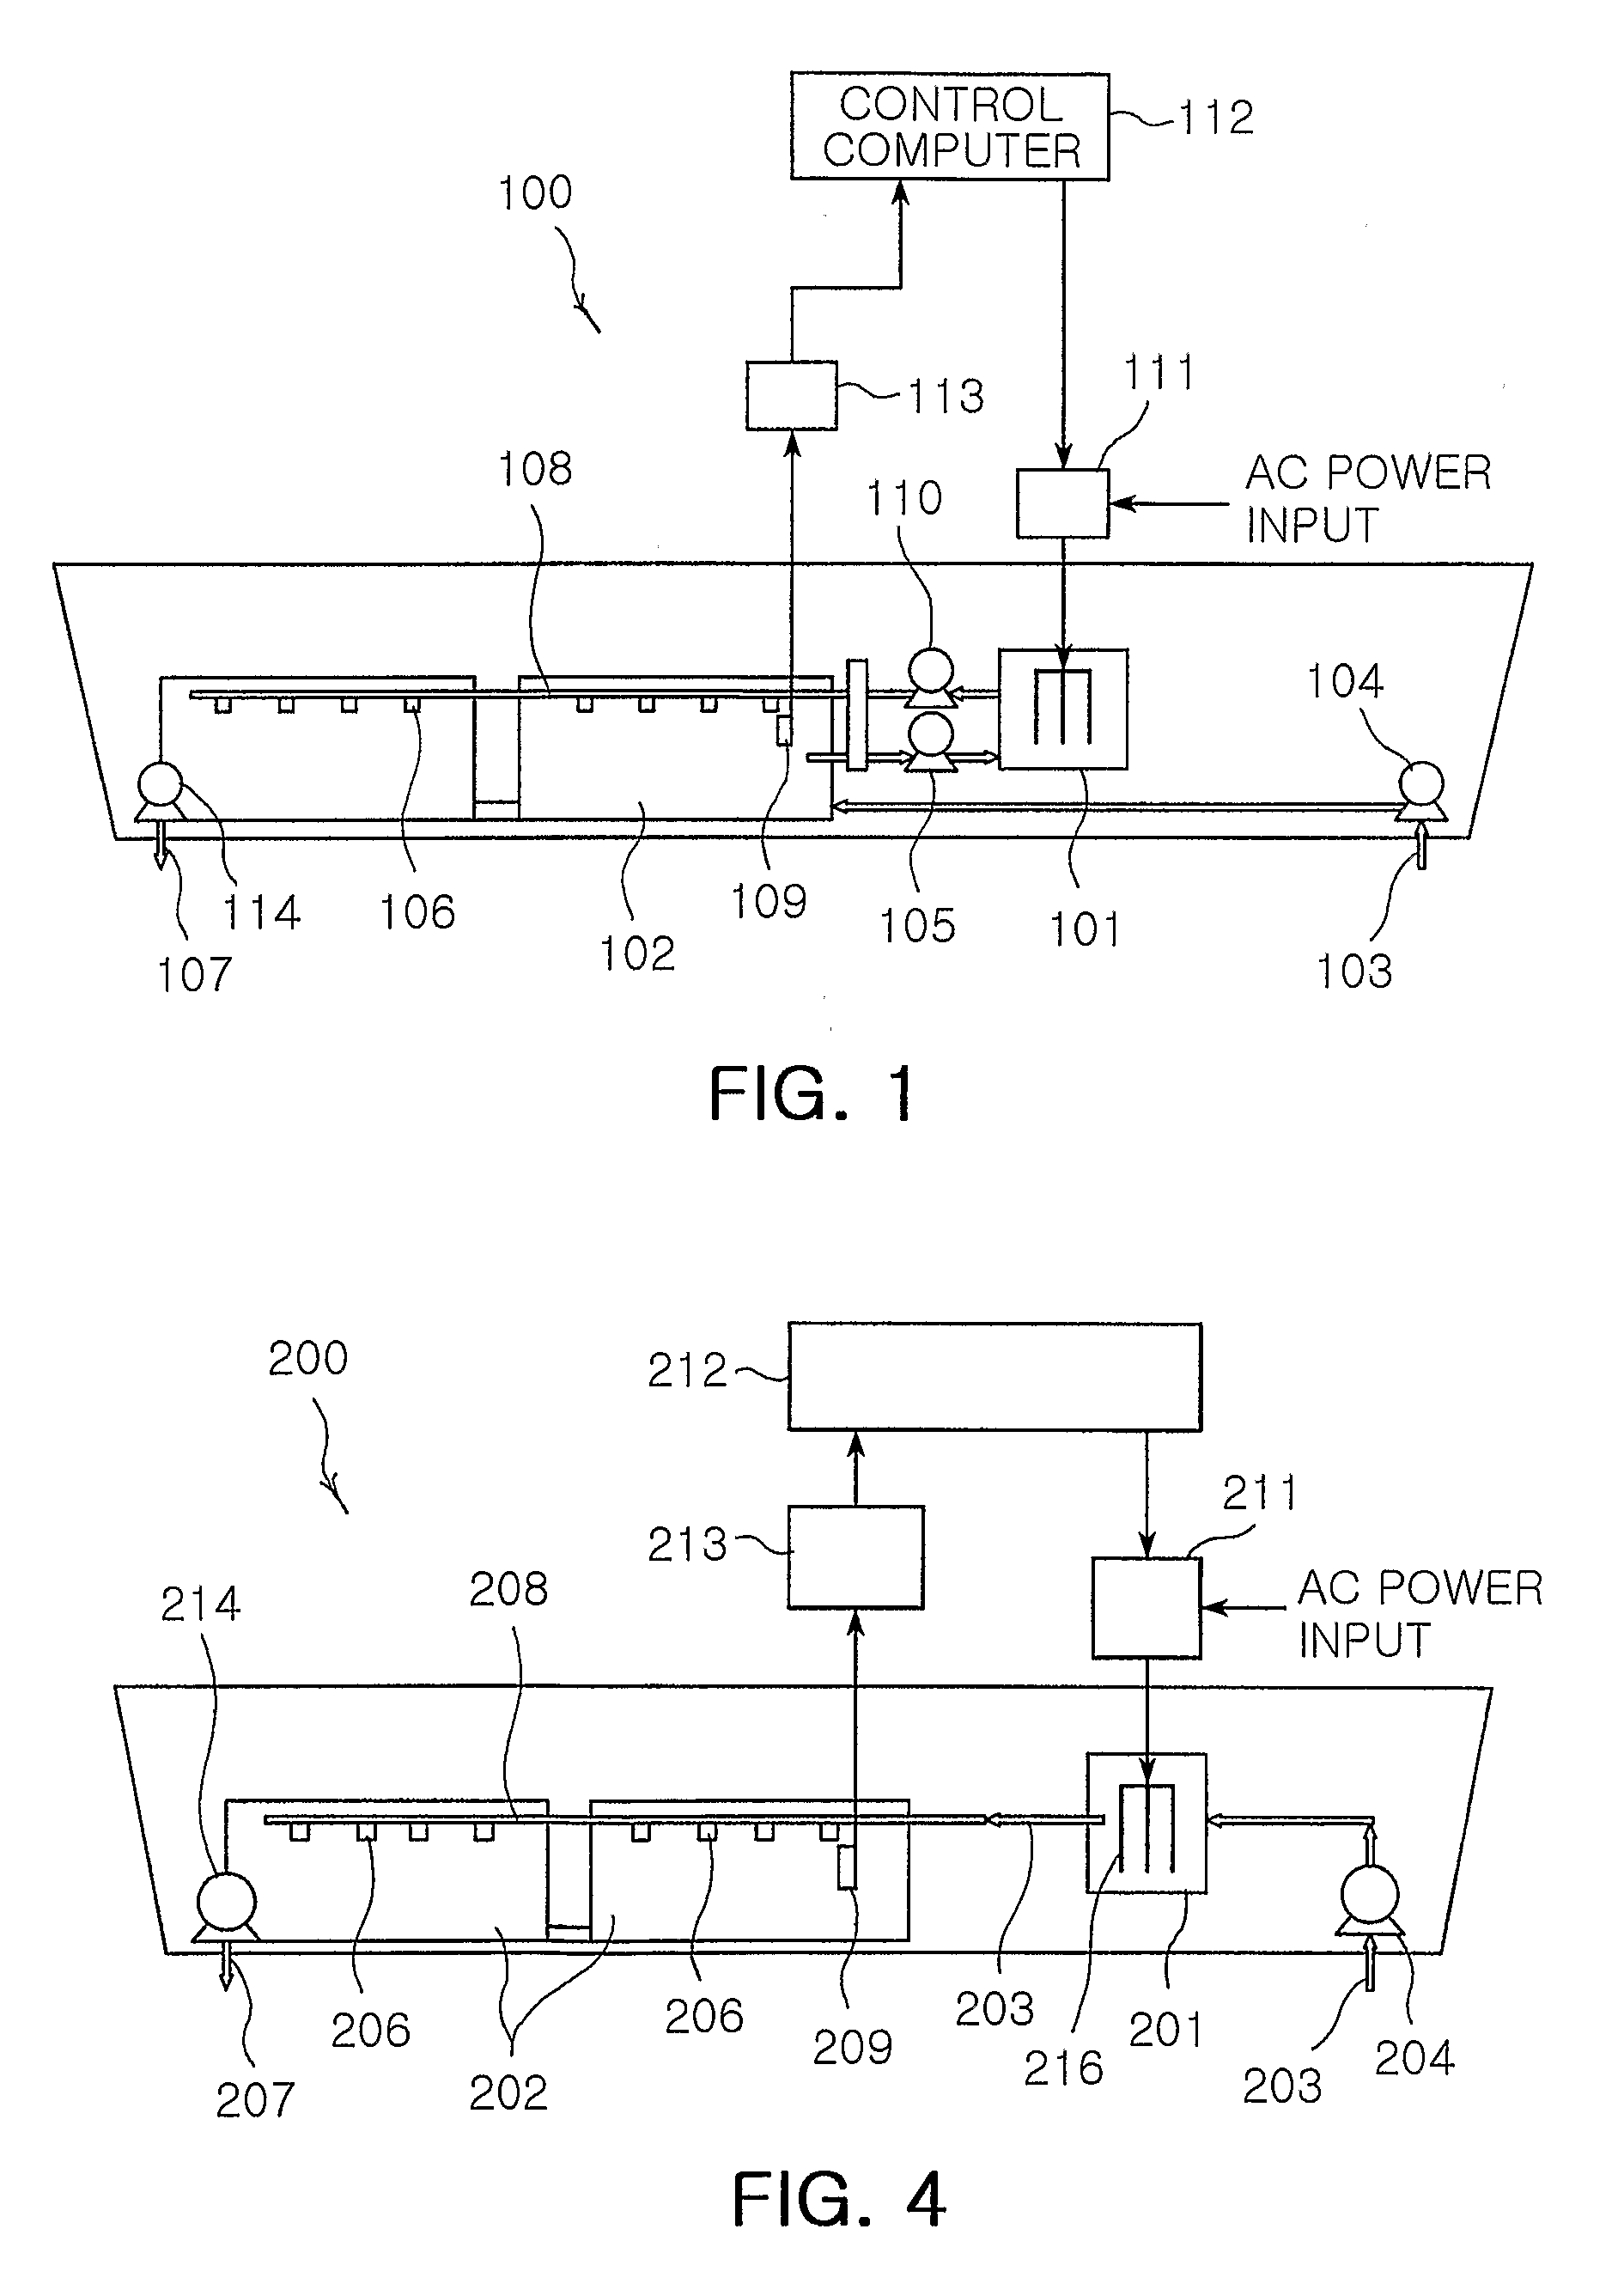 Apparatus and methods for treating ballast water by using electrolysis of natural seawater